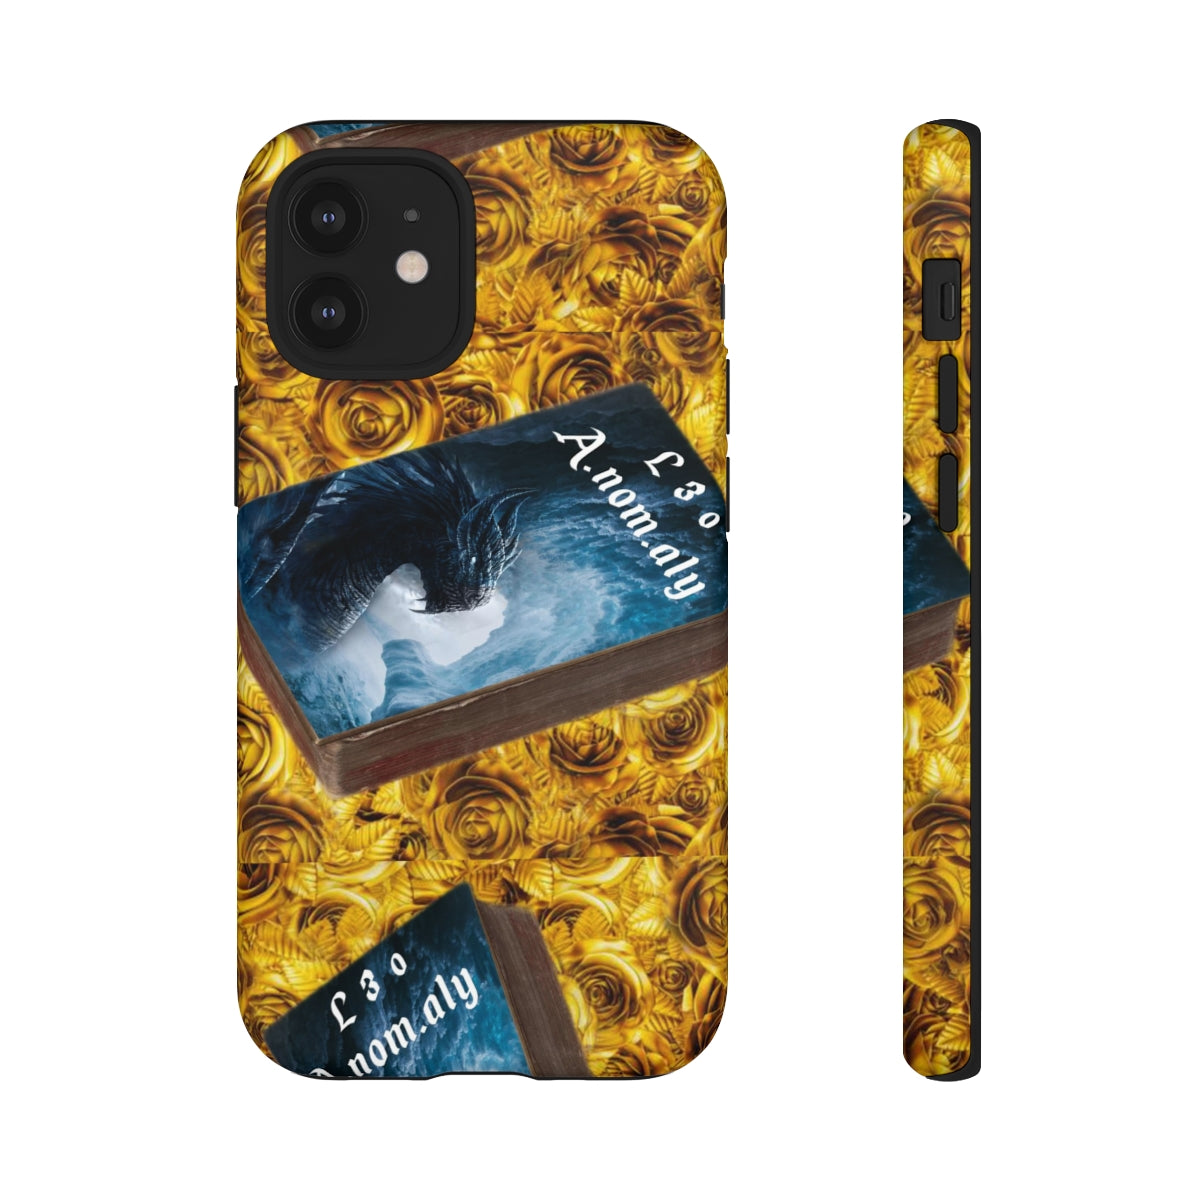 An.nom.aly Phone Cases